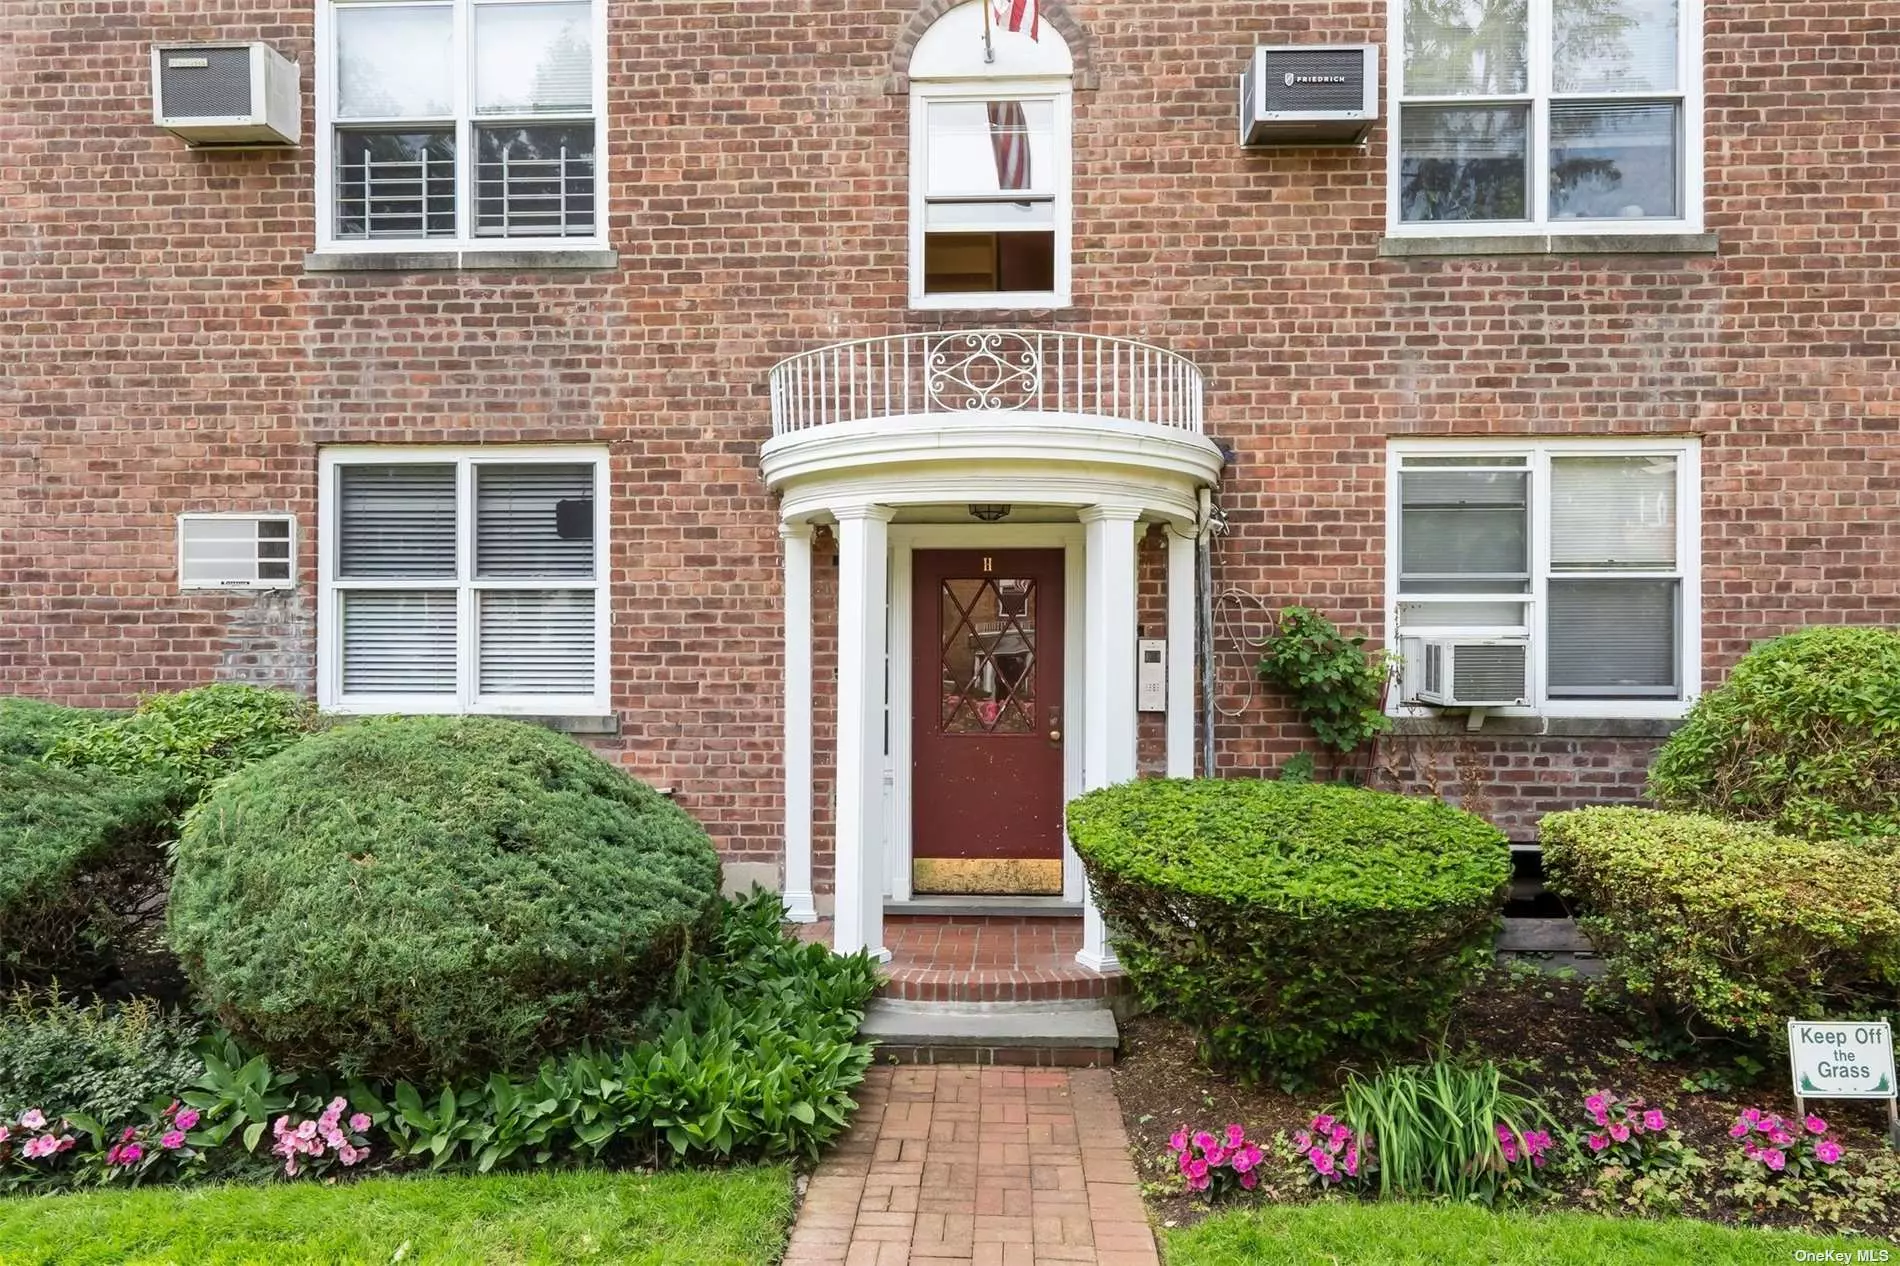 Well maintained 2 bed 1 bath coop in the heart of Great Neck. This third floor walkup includes a washer and dryer in unit. Minutes from the LIRR, shops and parks. The grounds are well manicured and you are overlooking the courtyard. Must see, will not last!